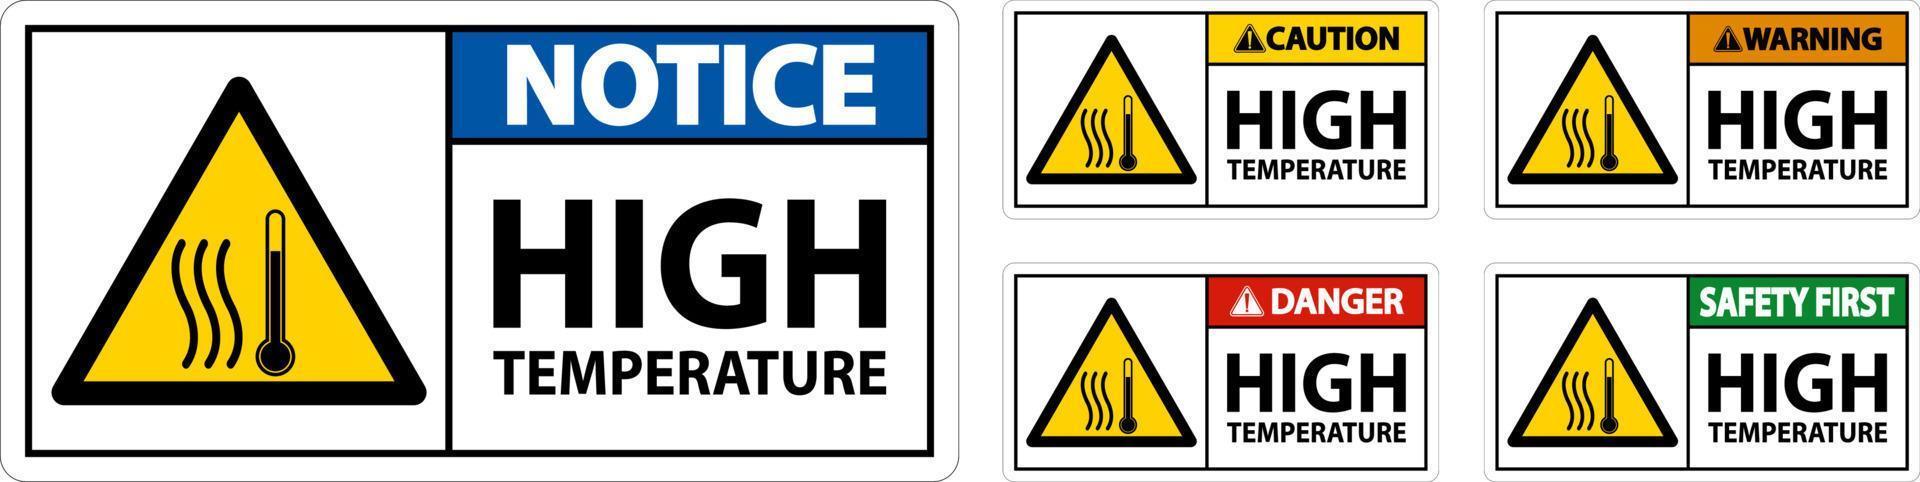 Caution High temperature symbol and text safety sign. vector